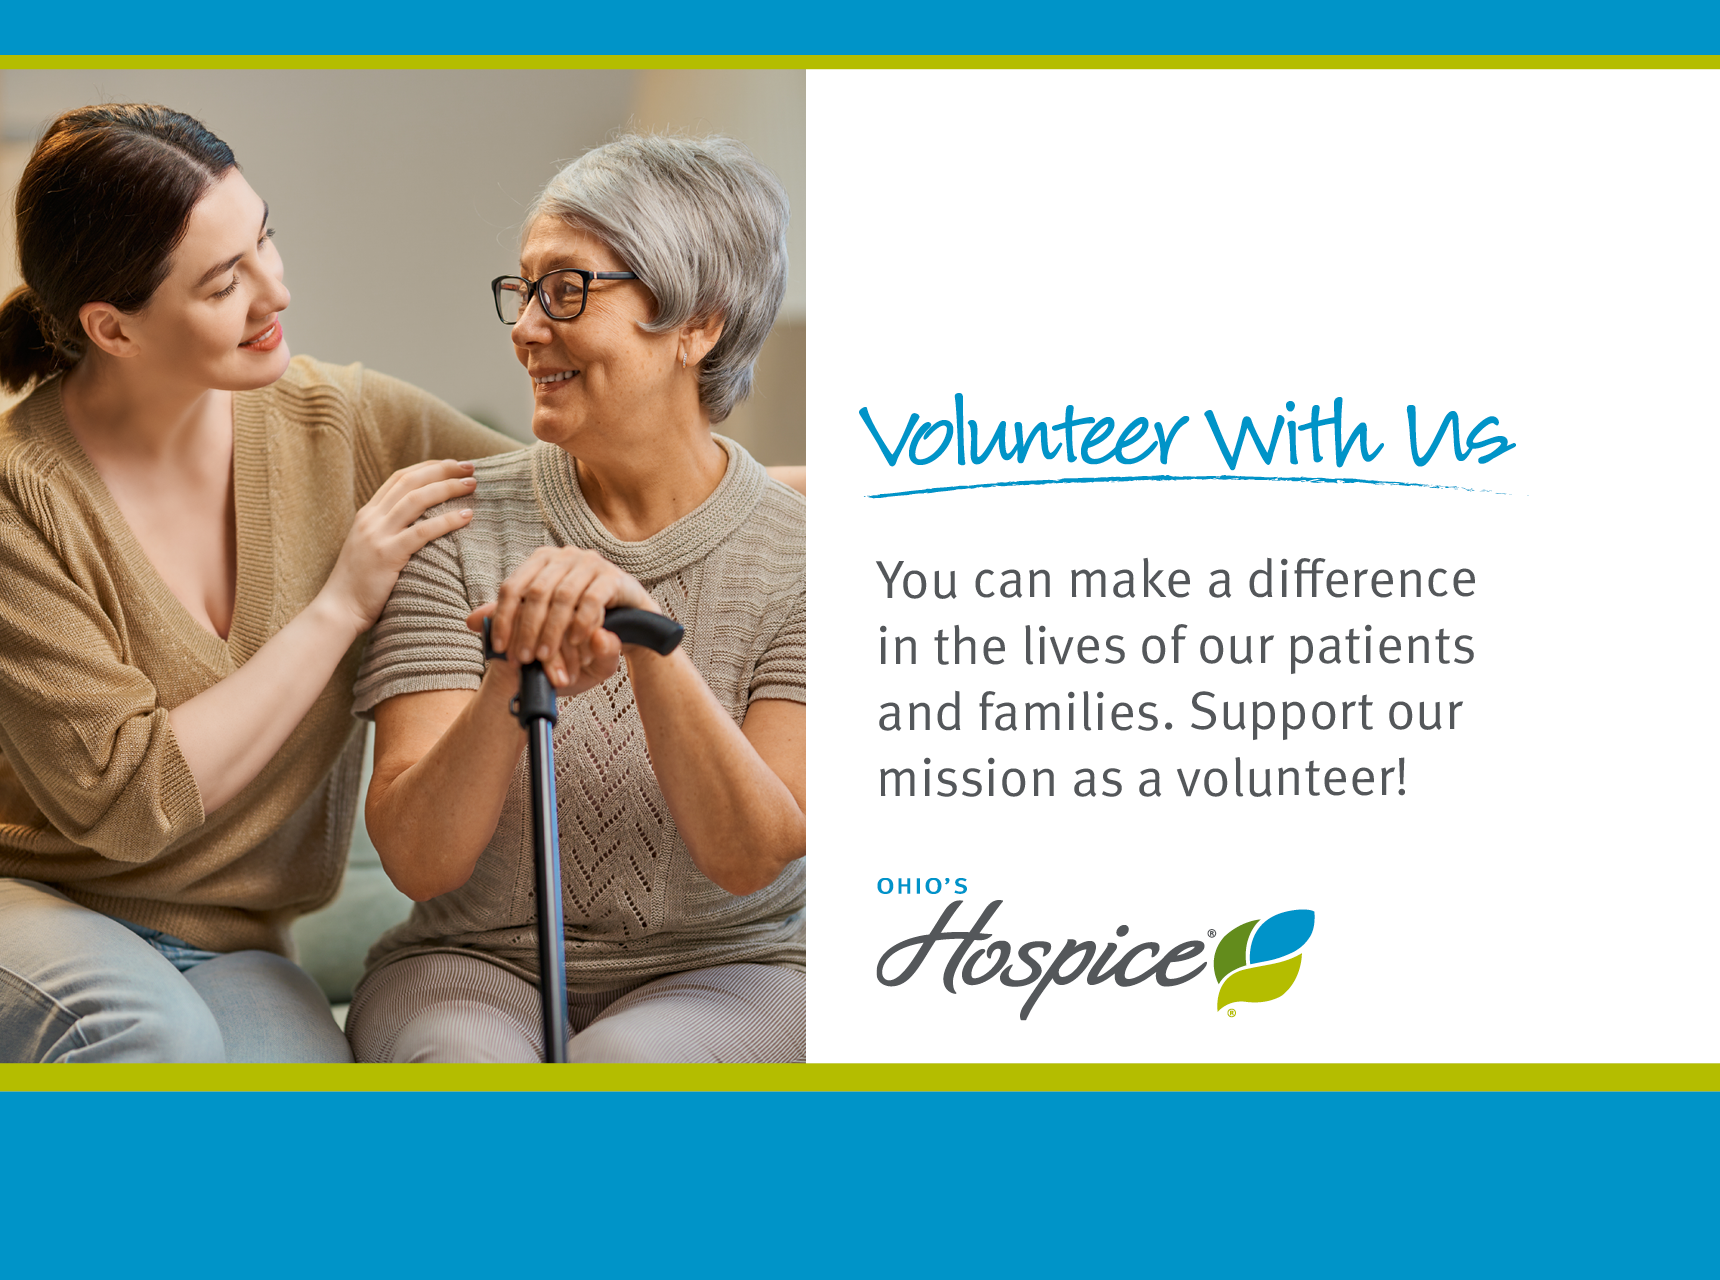 Volunteer With Us. You can make a difference in the lives of our patients and families. Support our mission as a volunteer! Ohio's Hospice